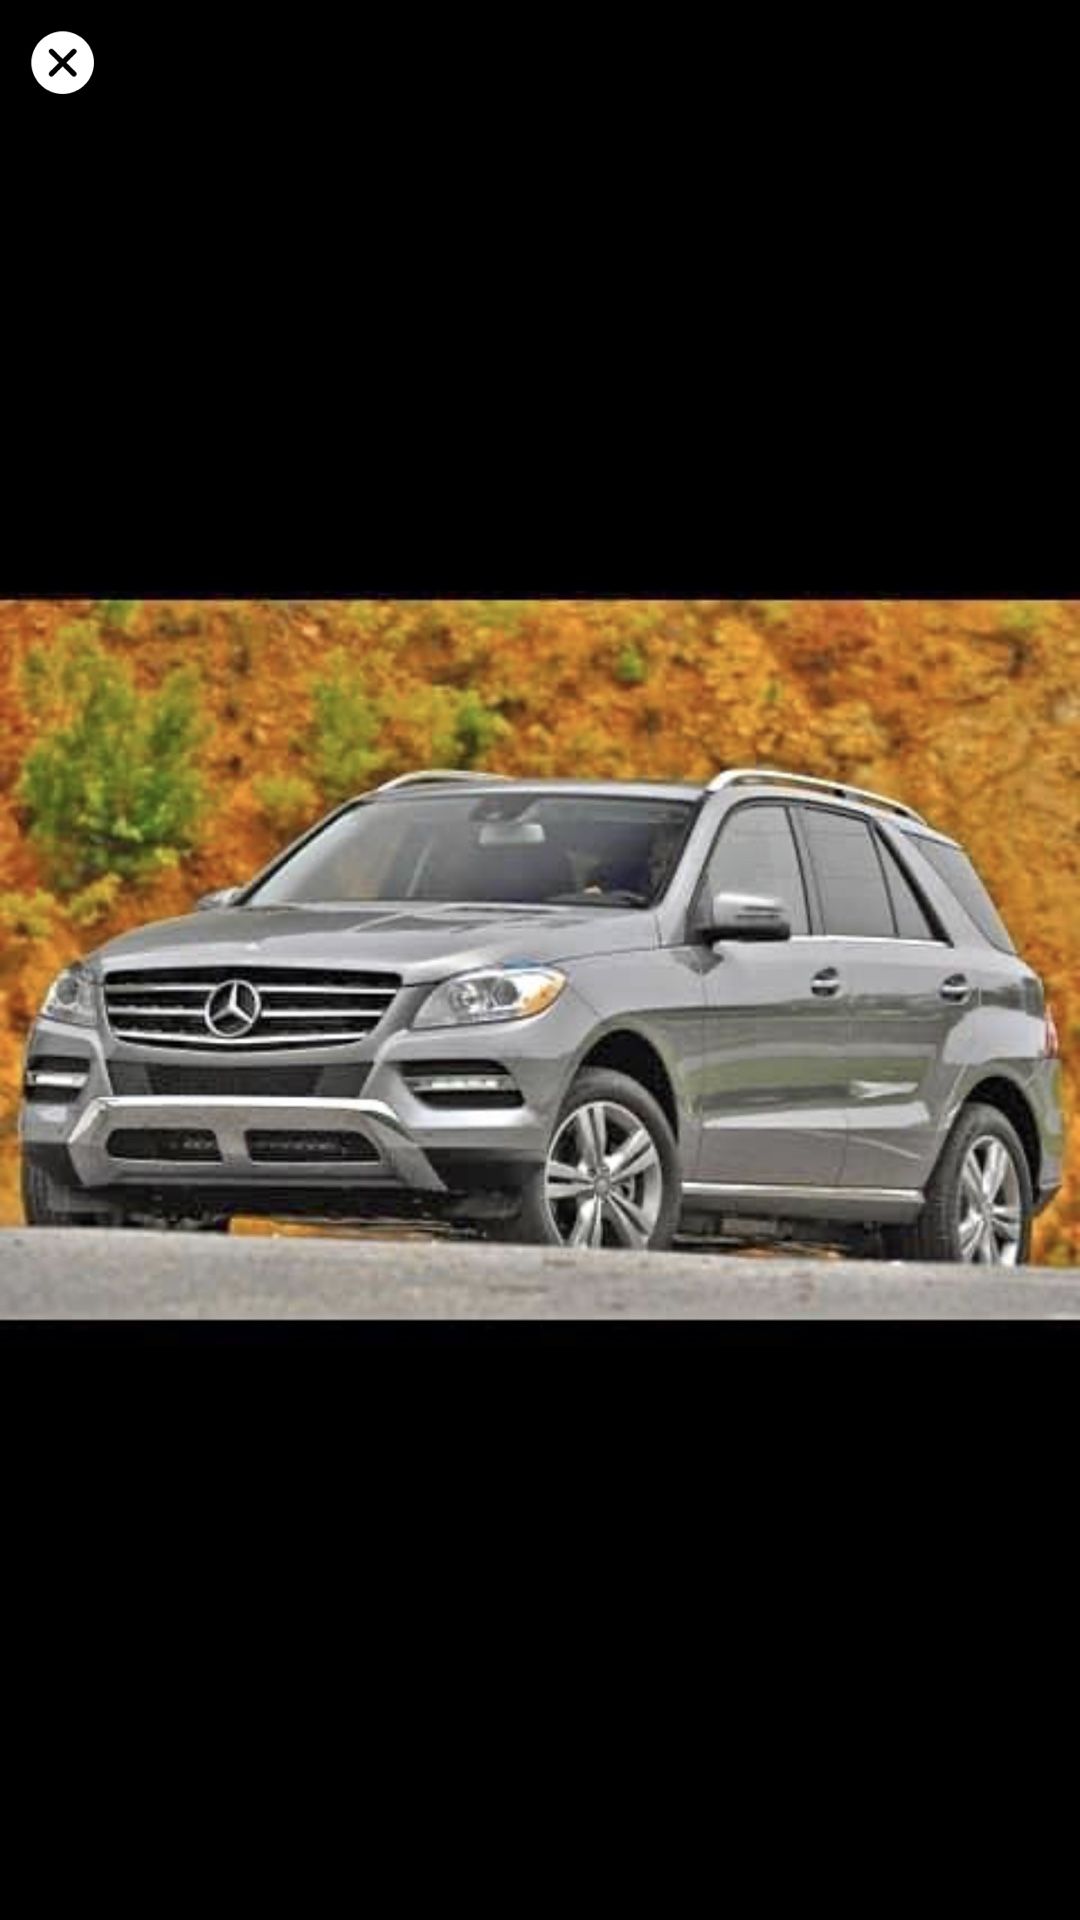 2013 Mercedes ml350 for parts